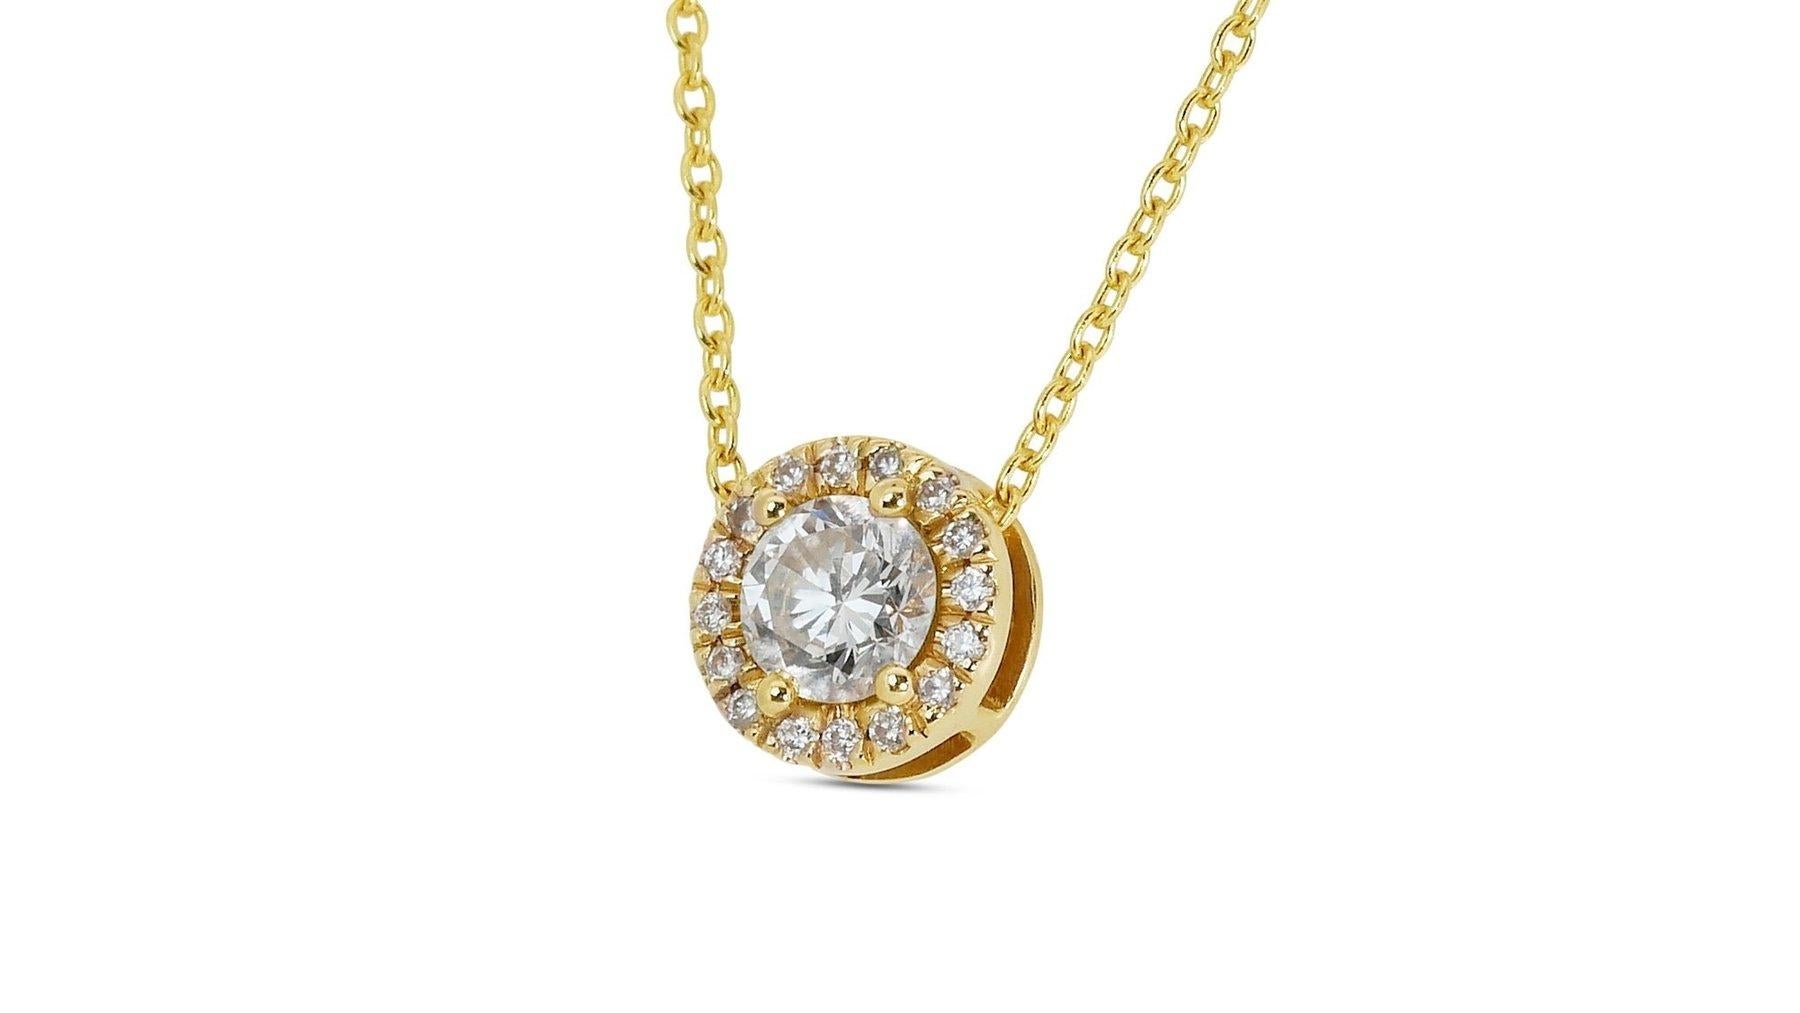 Beautiful 0.40 ct Diamond Halo Necklace in 14k Yellow Gold - AIG Certified

Crafted with precision and care, this exquisite diamond halo necklace in 14k yellow gold captures the essence of refined elegance. It features a total diamond weight of